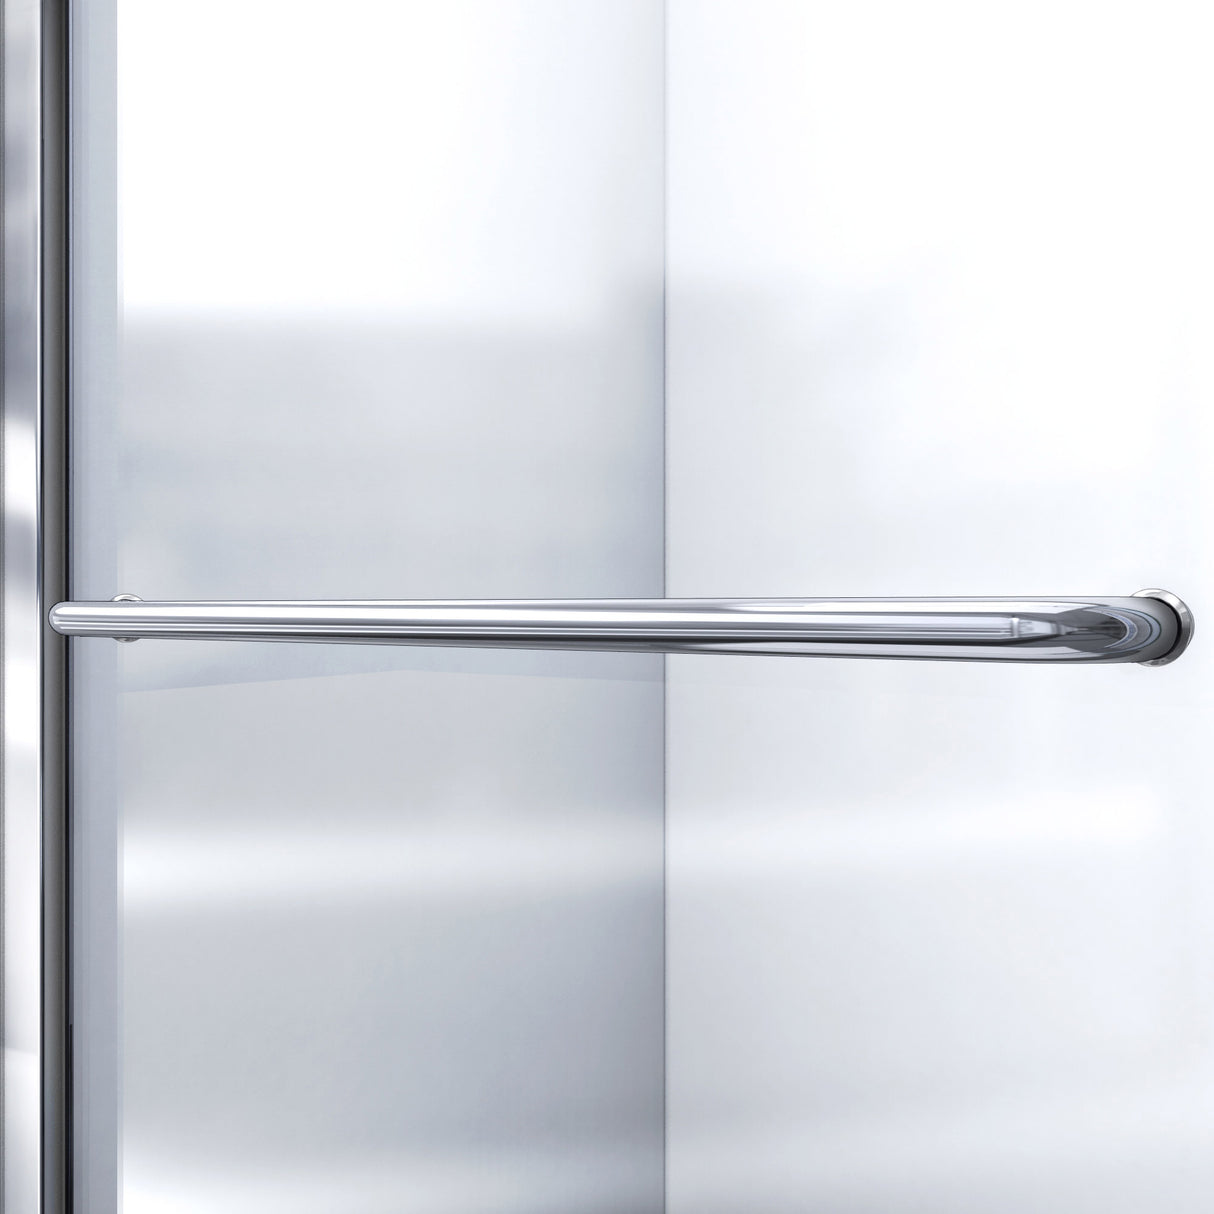 DreamLine Infinity-Z 36 in. D x 60 in. W x 78 3/4 in. H Sliding Shower Door, Base, and White Wall Kit in Brushed Nickel and Clear Glass